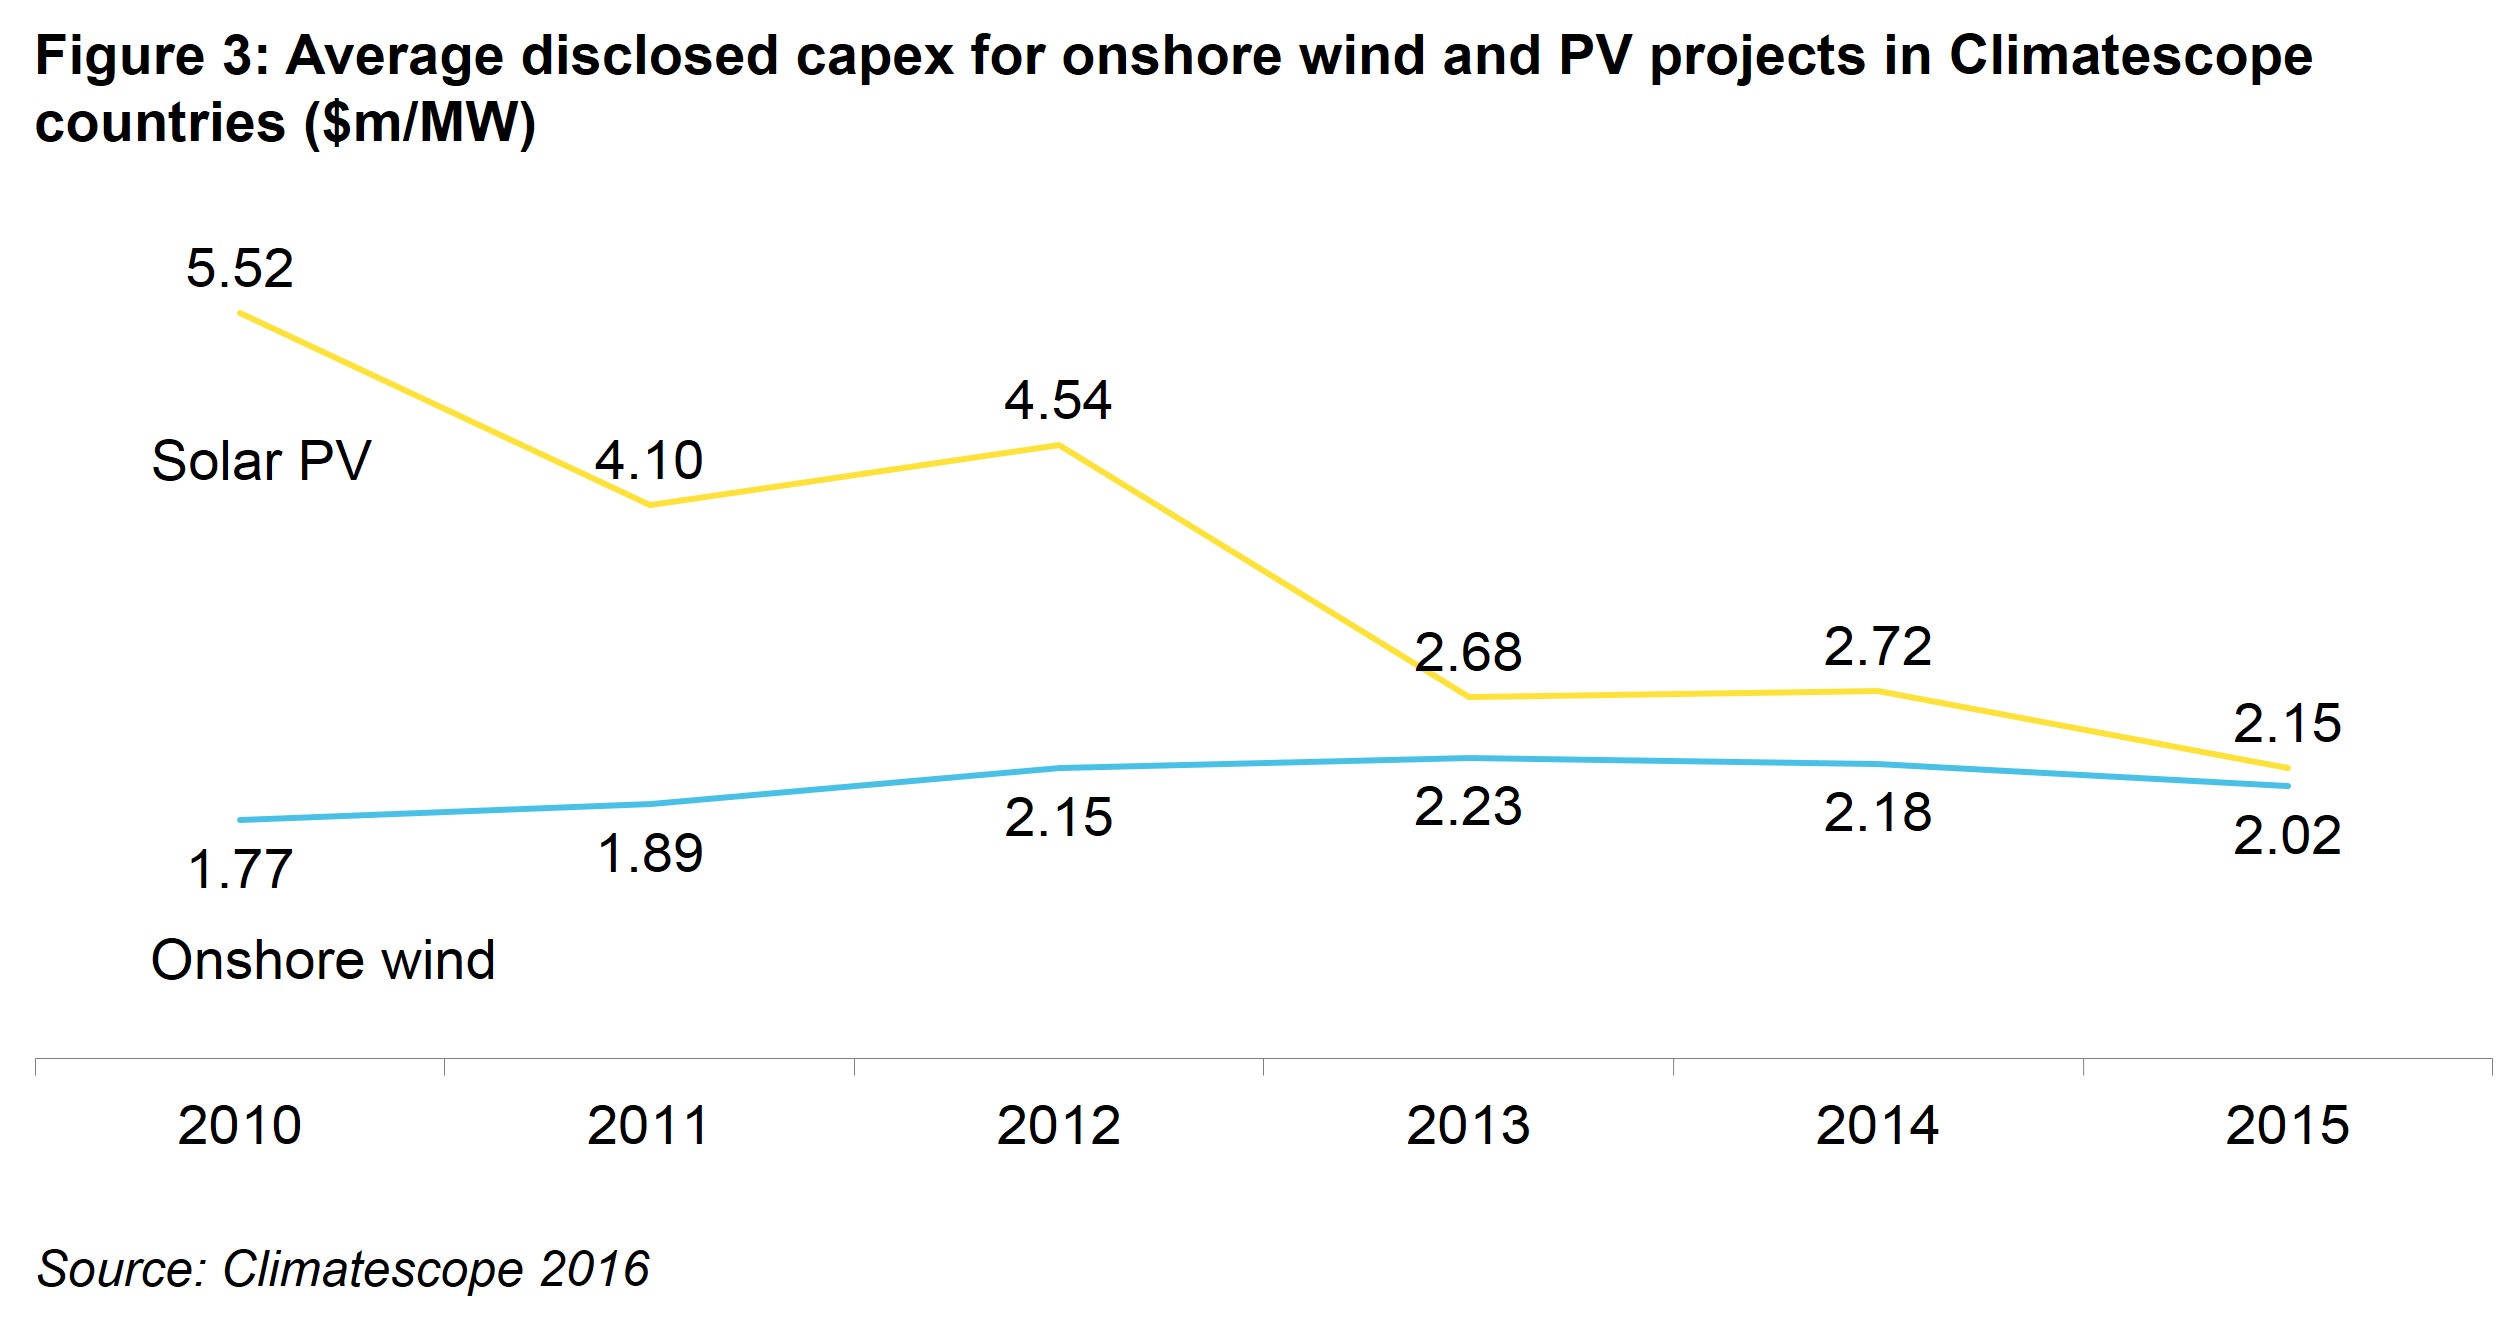 Executive Summary Fig 3 - Average disclosed capex for onshore wind and PV projects in Climatescope countries ($m/MW)